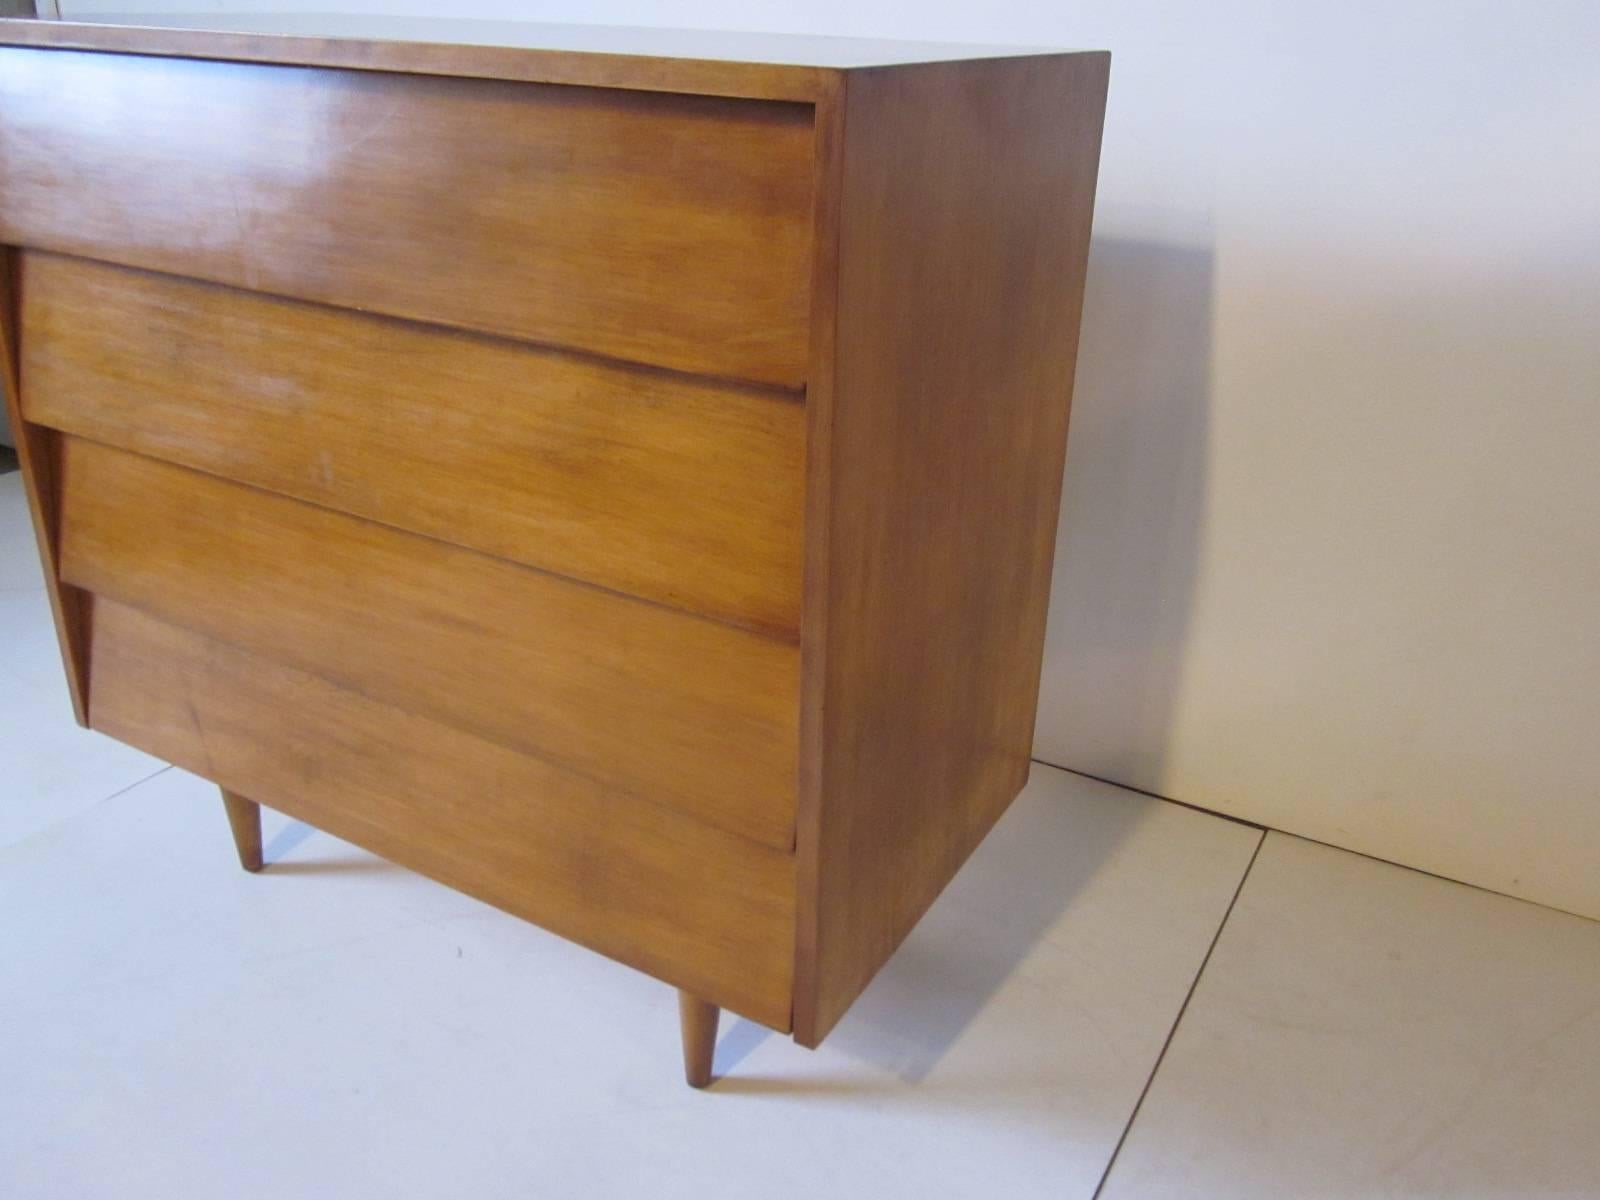 A medium toned maple four-drawer dresser chest with angled drawer fronts sitting on conical legs, a very early design manufactured by Knoll.